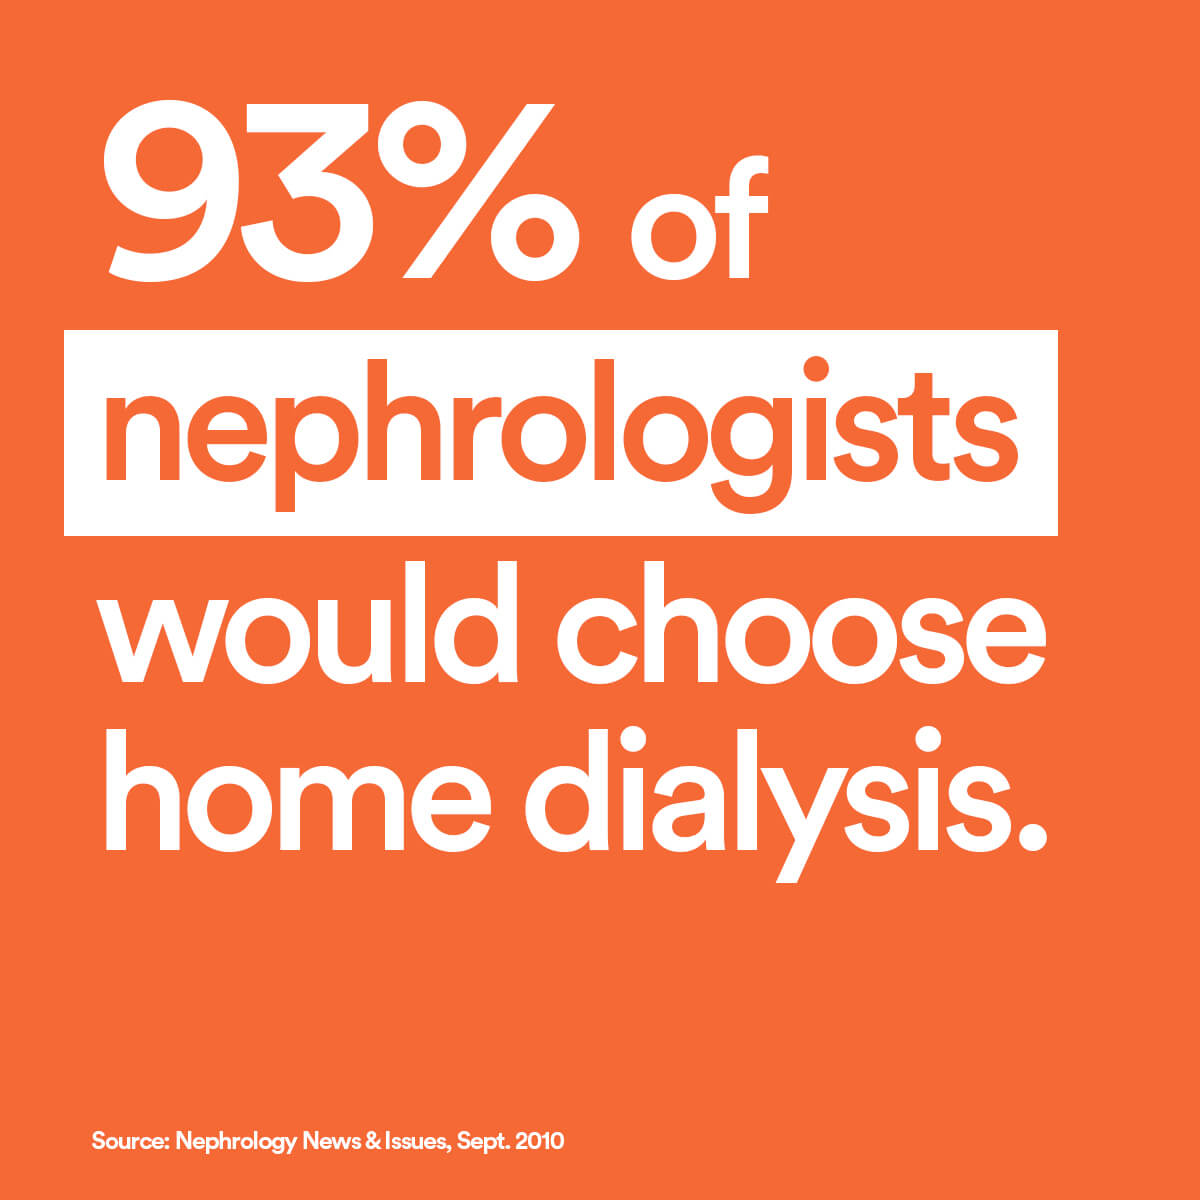 Why Home Dialysis